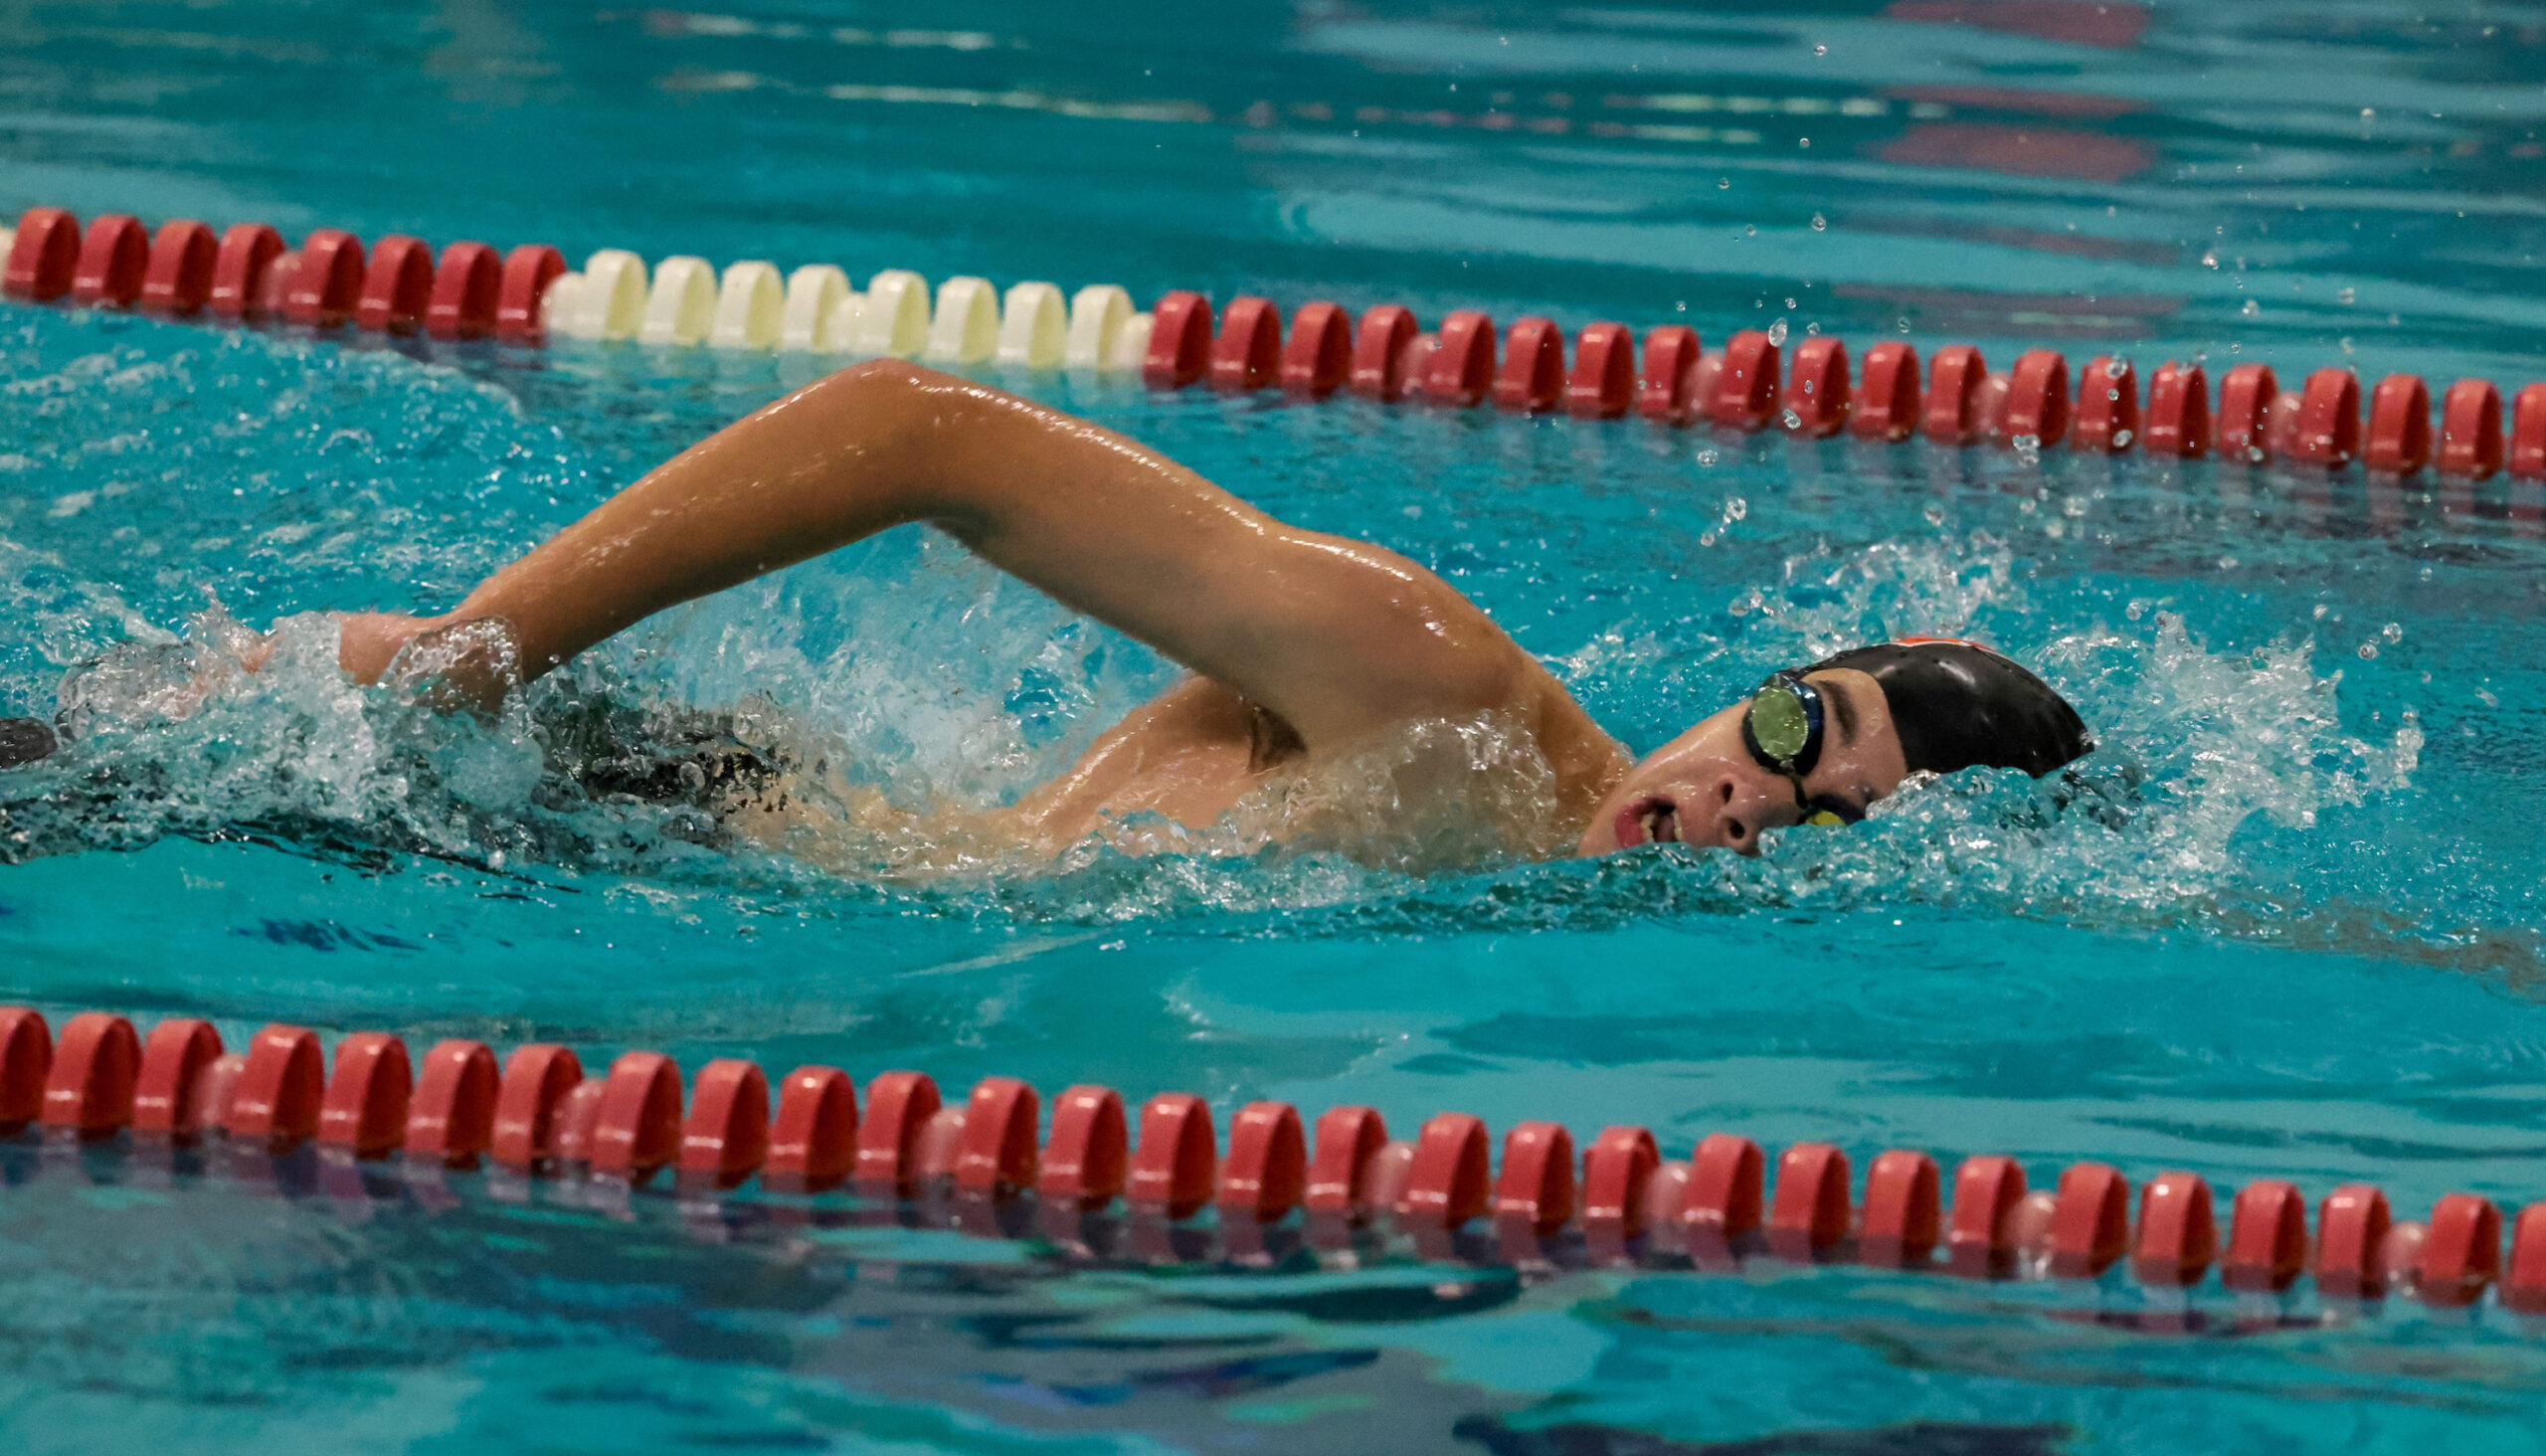 HHS swimmers look to peak for postseason